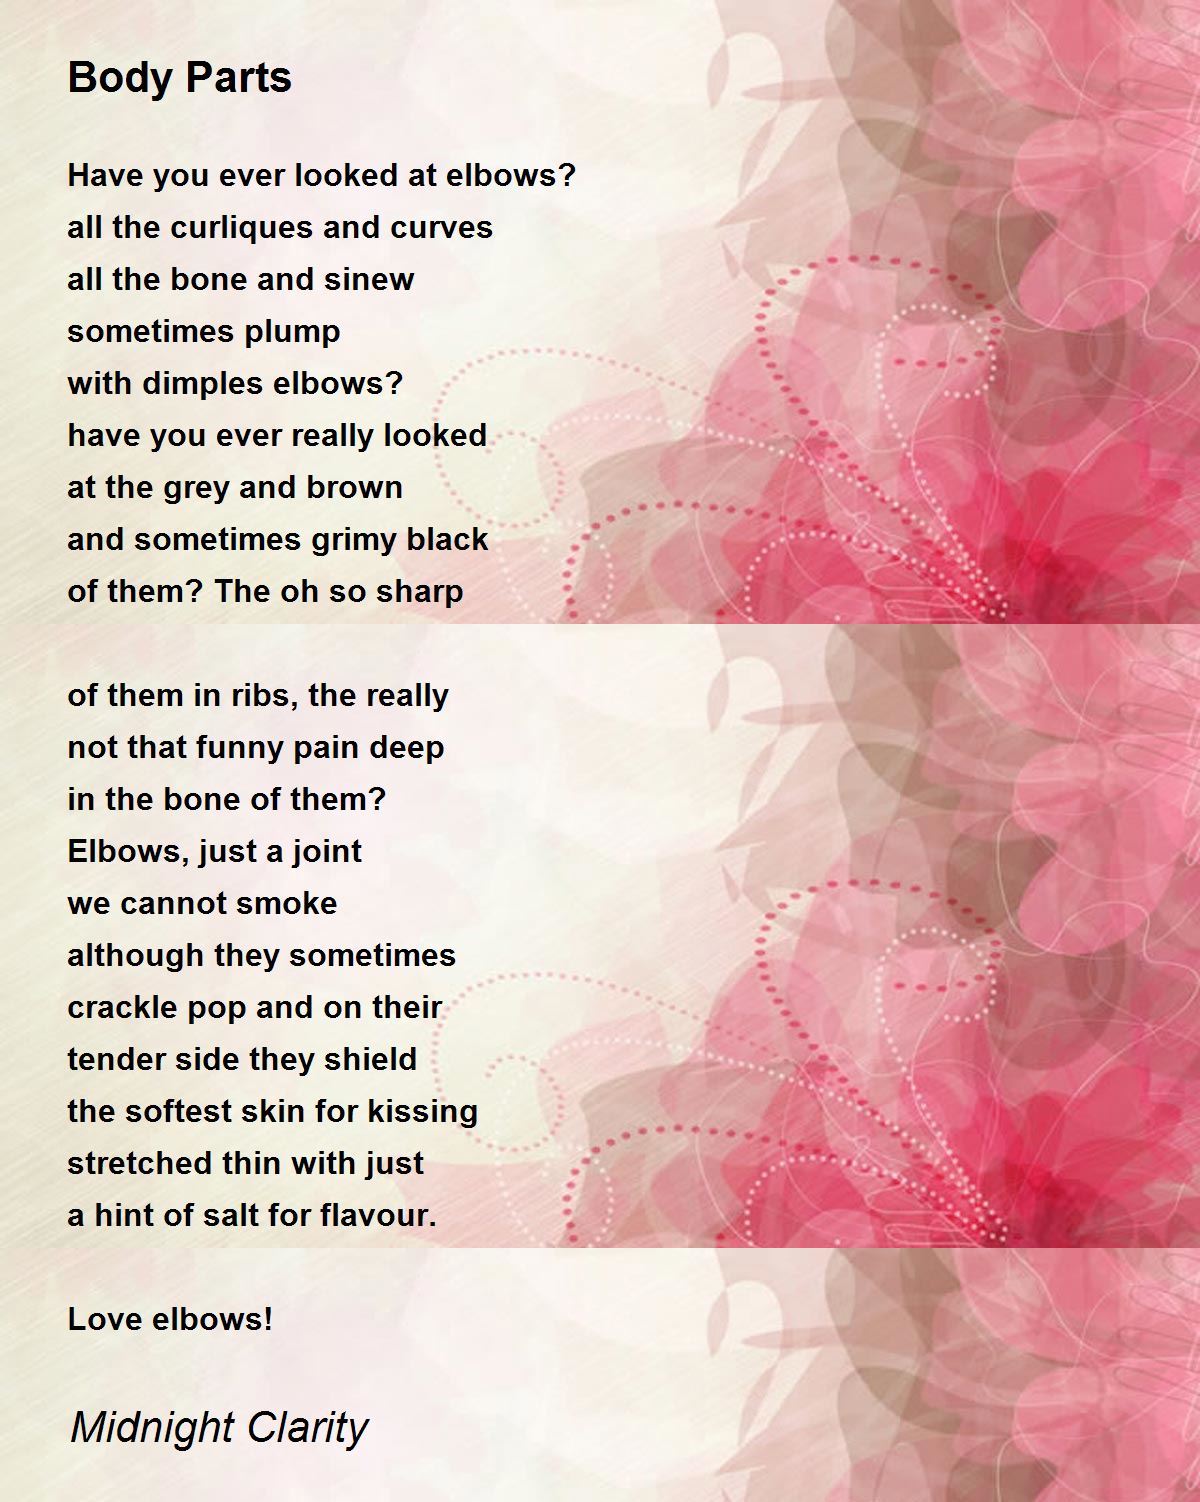 Body Parts - Body Parts Poem by Midnight Clarity